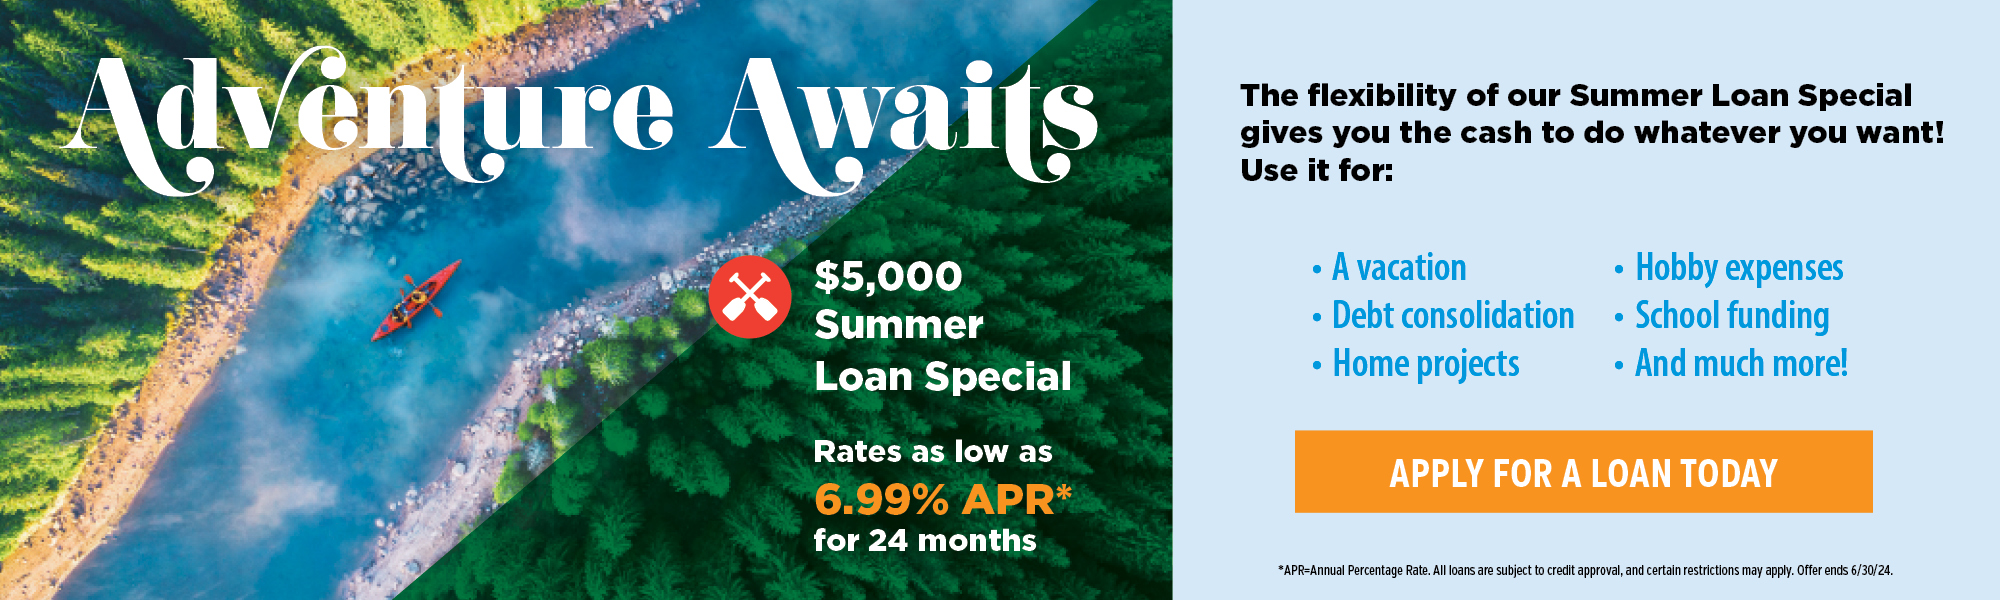 Adventure awaits! Summer loan special. Low rates on a signature loan up to $5,000. Click to apply.